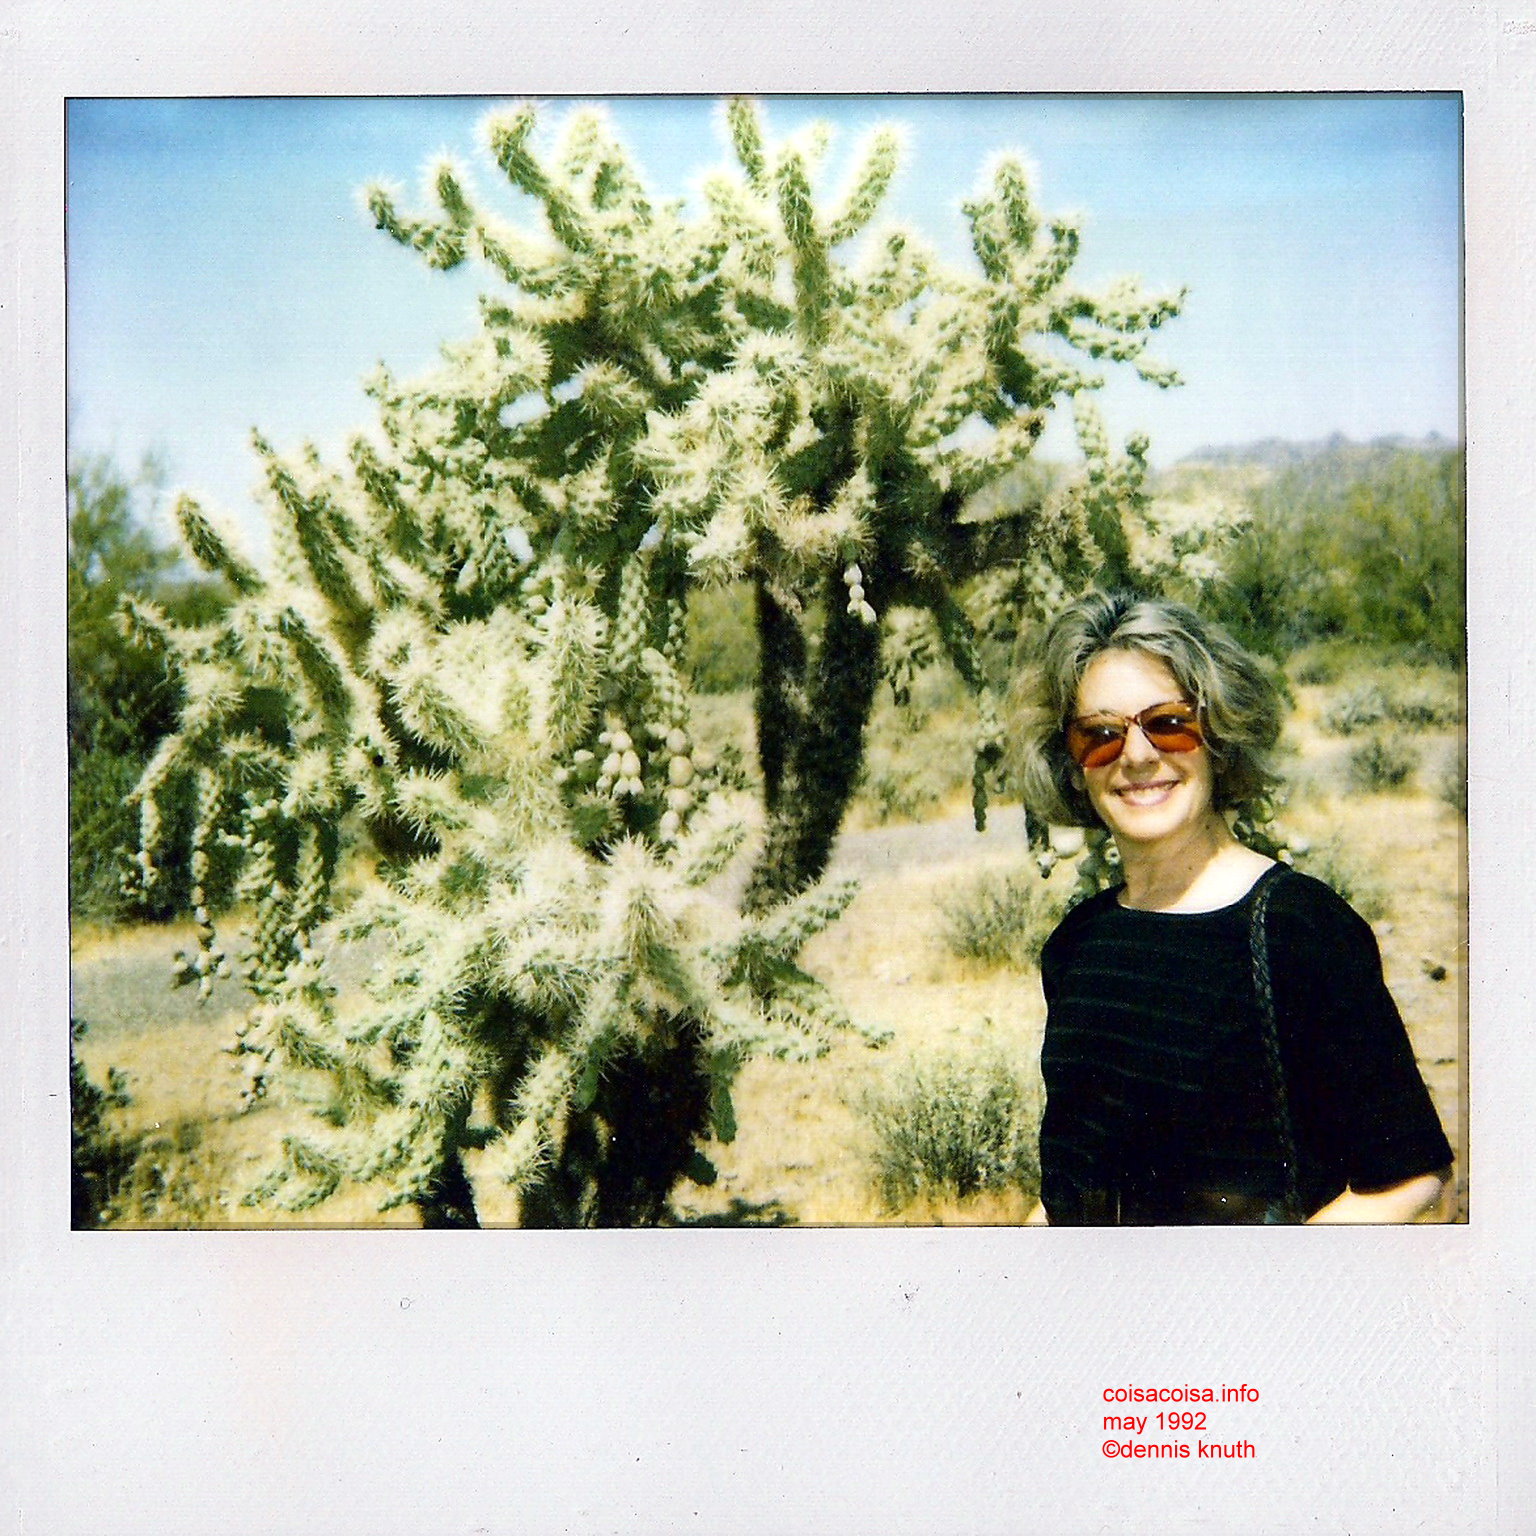 Sonja and a cactus